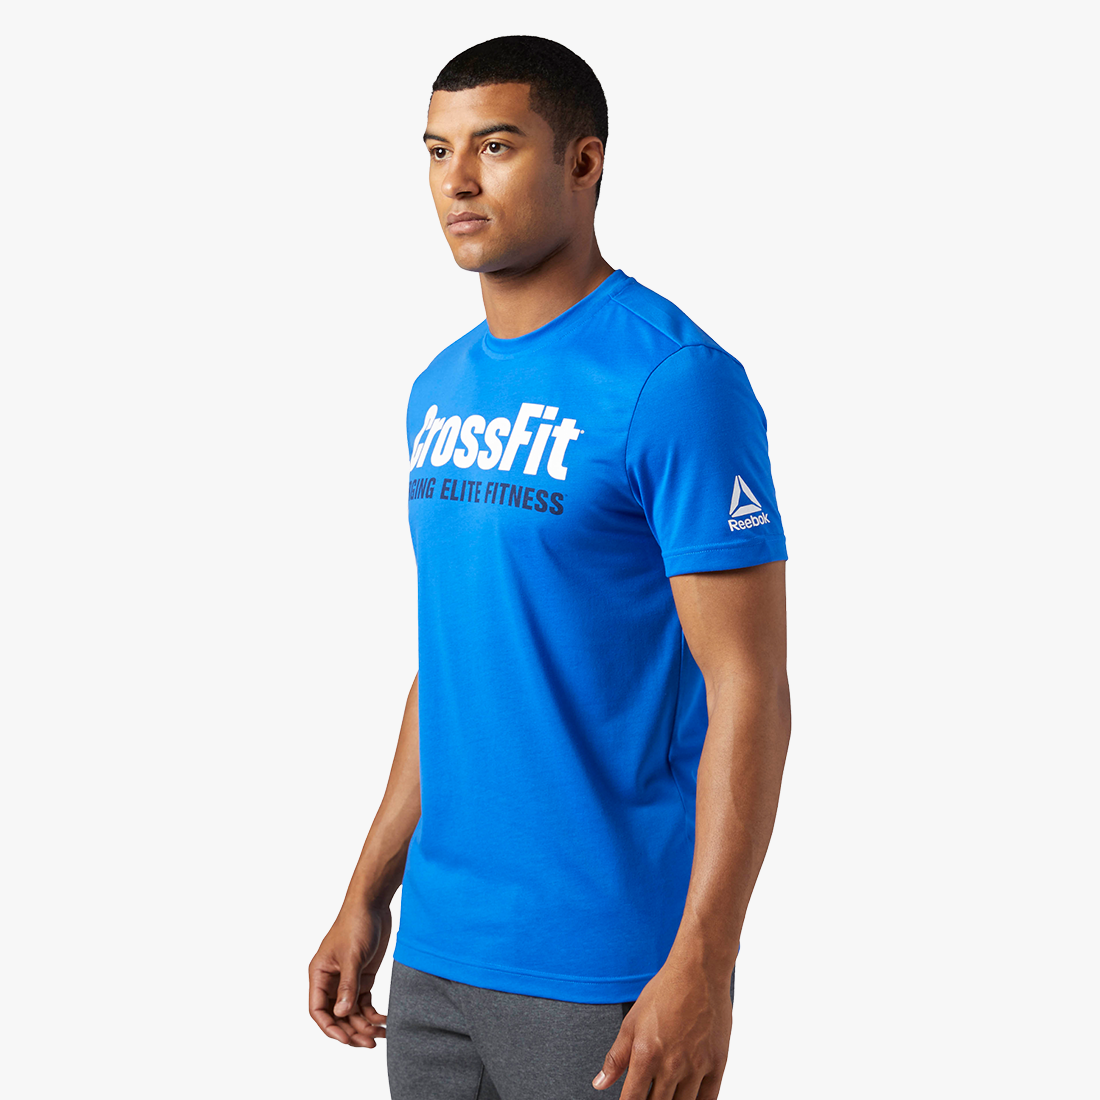 Bevise Slid græs Reebok - Crossfit Speedwick F.E.F. Graphic Tee - Comfortable and stylish -  TRU·FIT